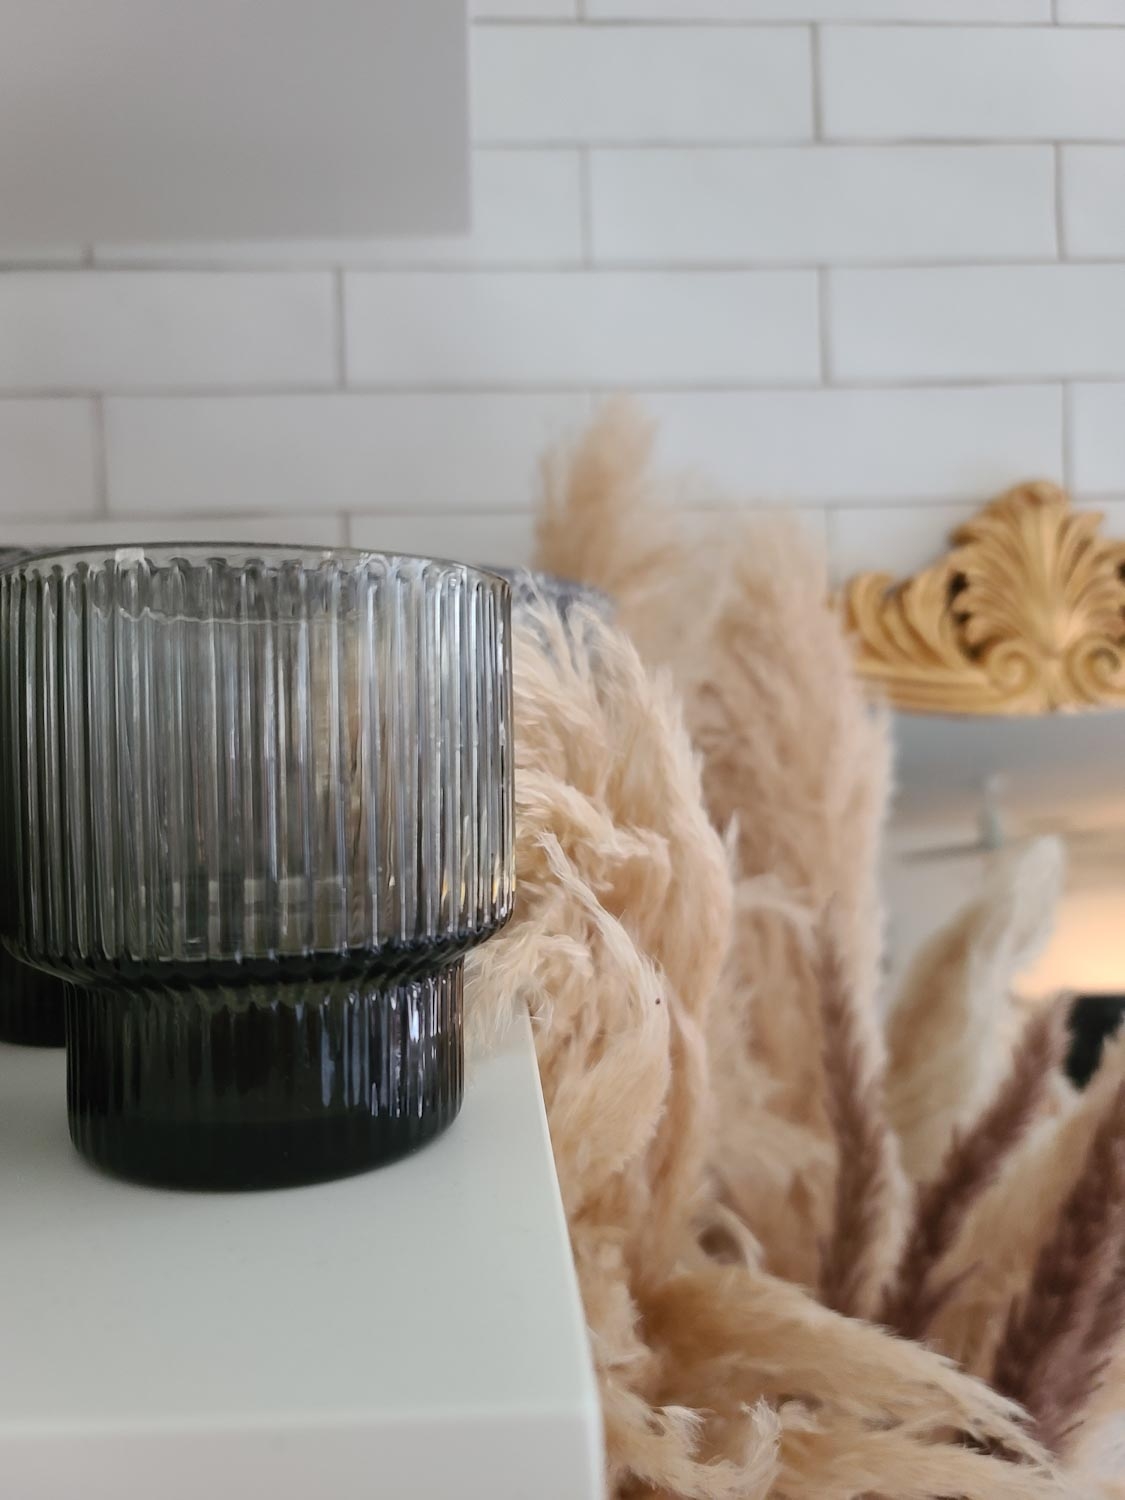 At Home Shopping Fall Winter Cozy Seasonal Decor Kitchen Office Modern Scandinavian Holiday Boho Eclectic Style Refresh Black White Decor Faux Fur Baskets Metal Side Table Velvet Chair candles vintage mirror hygge design 